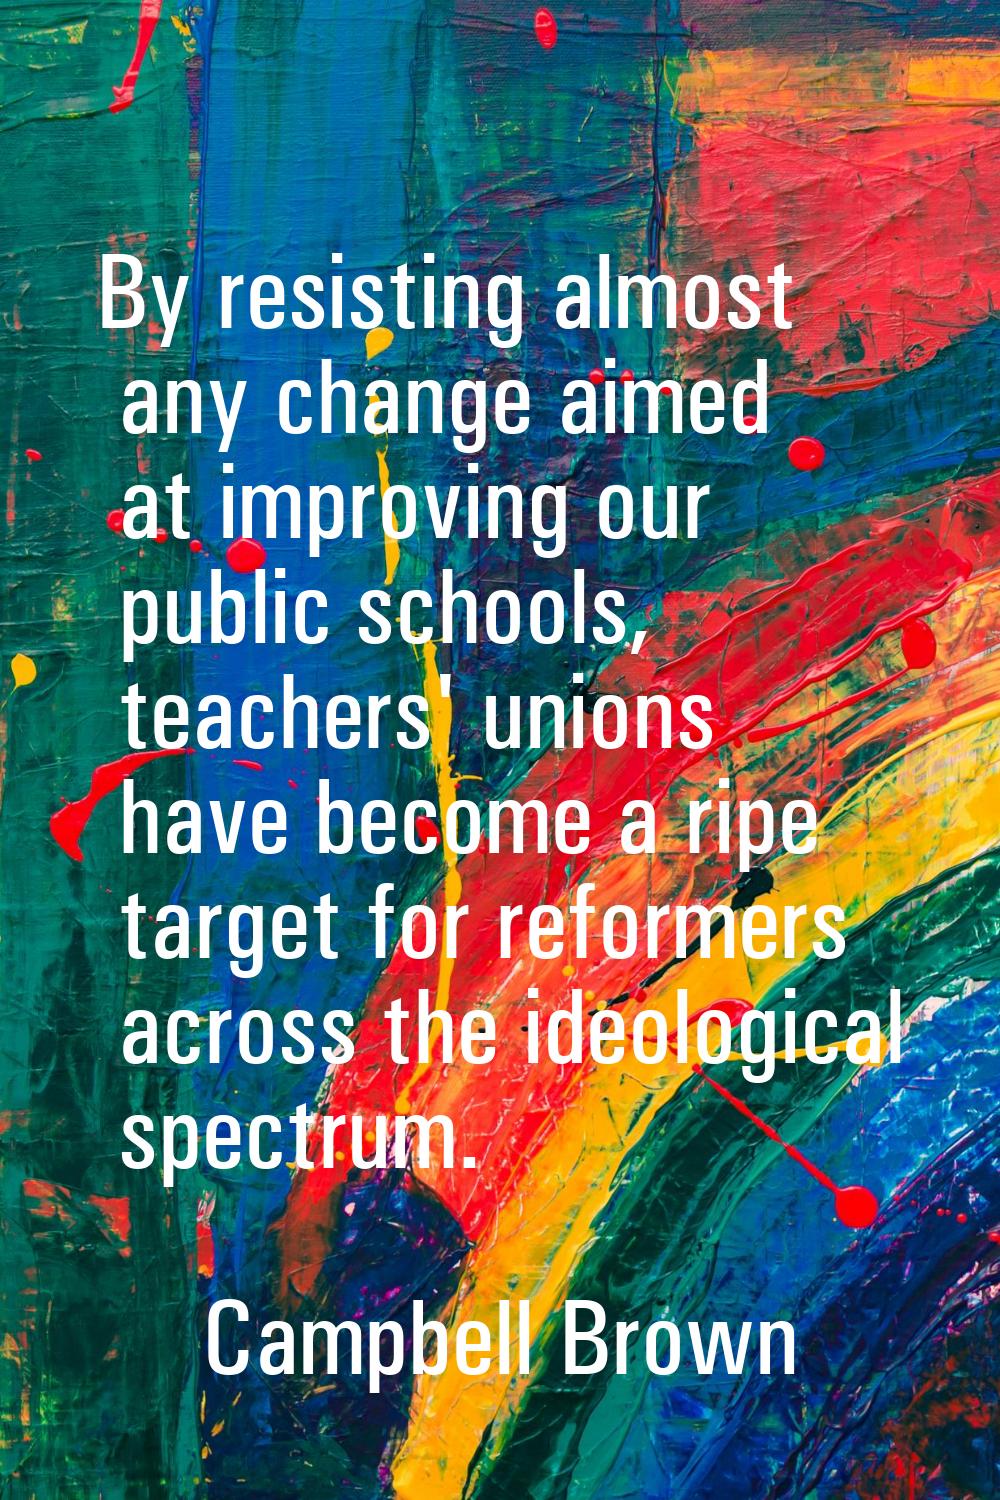 By resisting almost any change aimed at improving our public schools, teachers' unions have become 